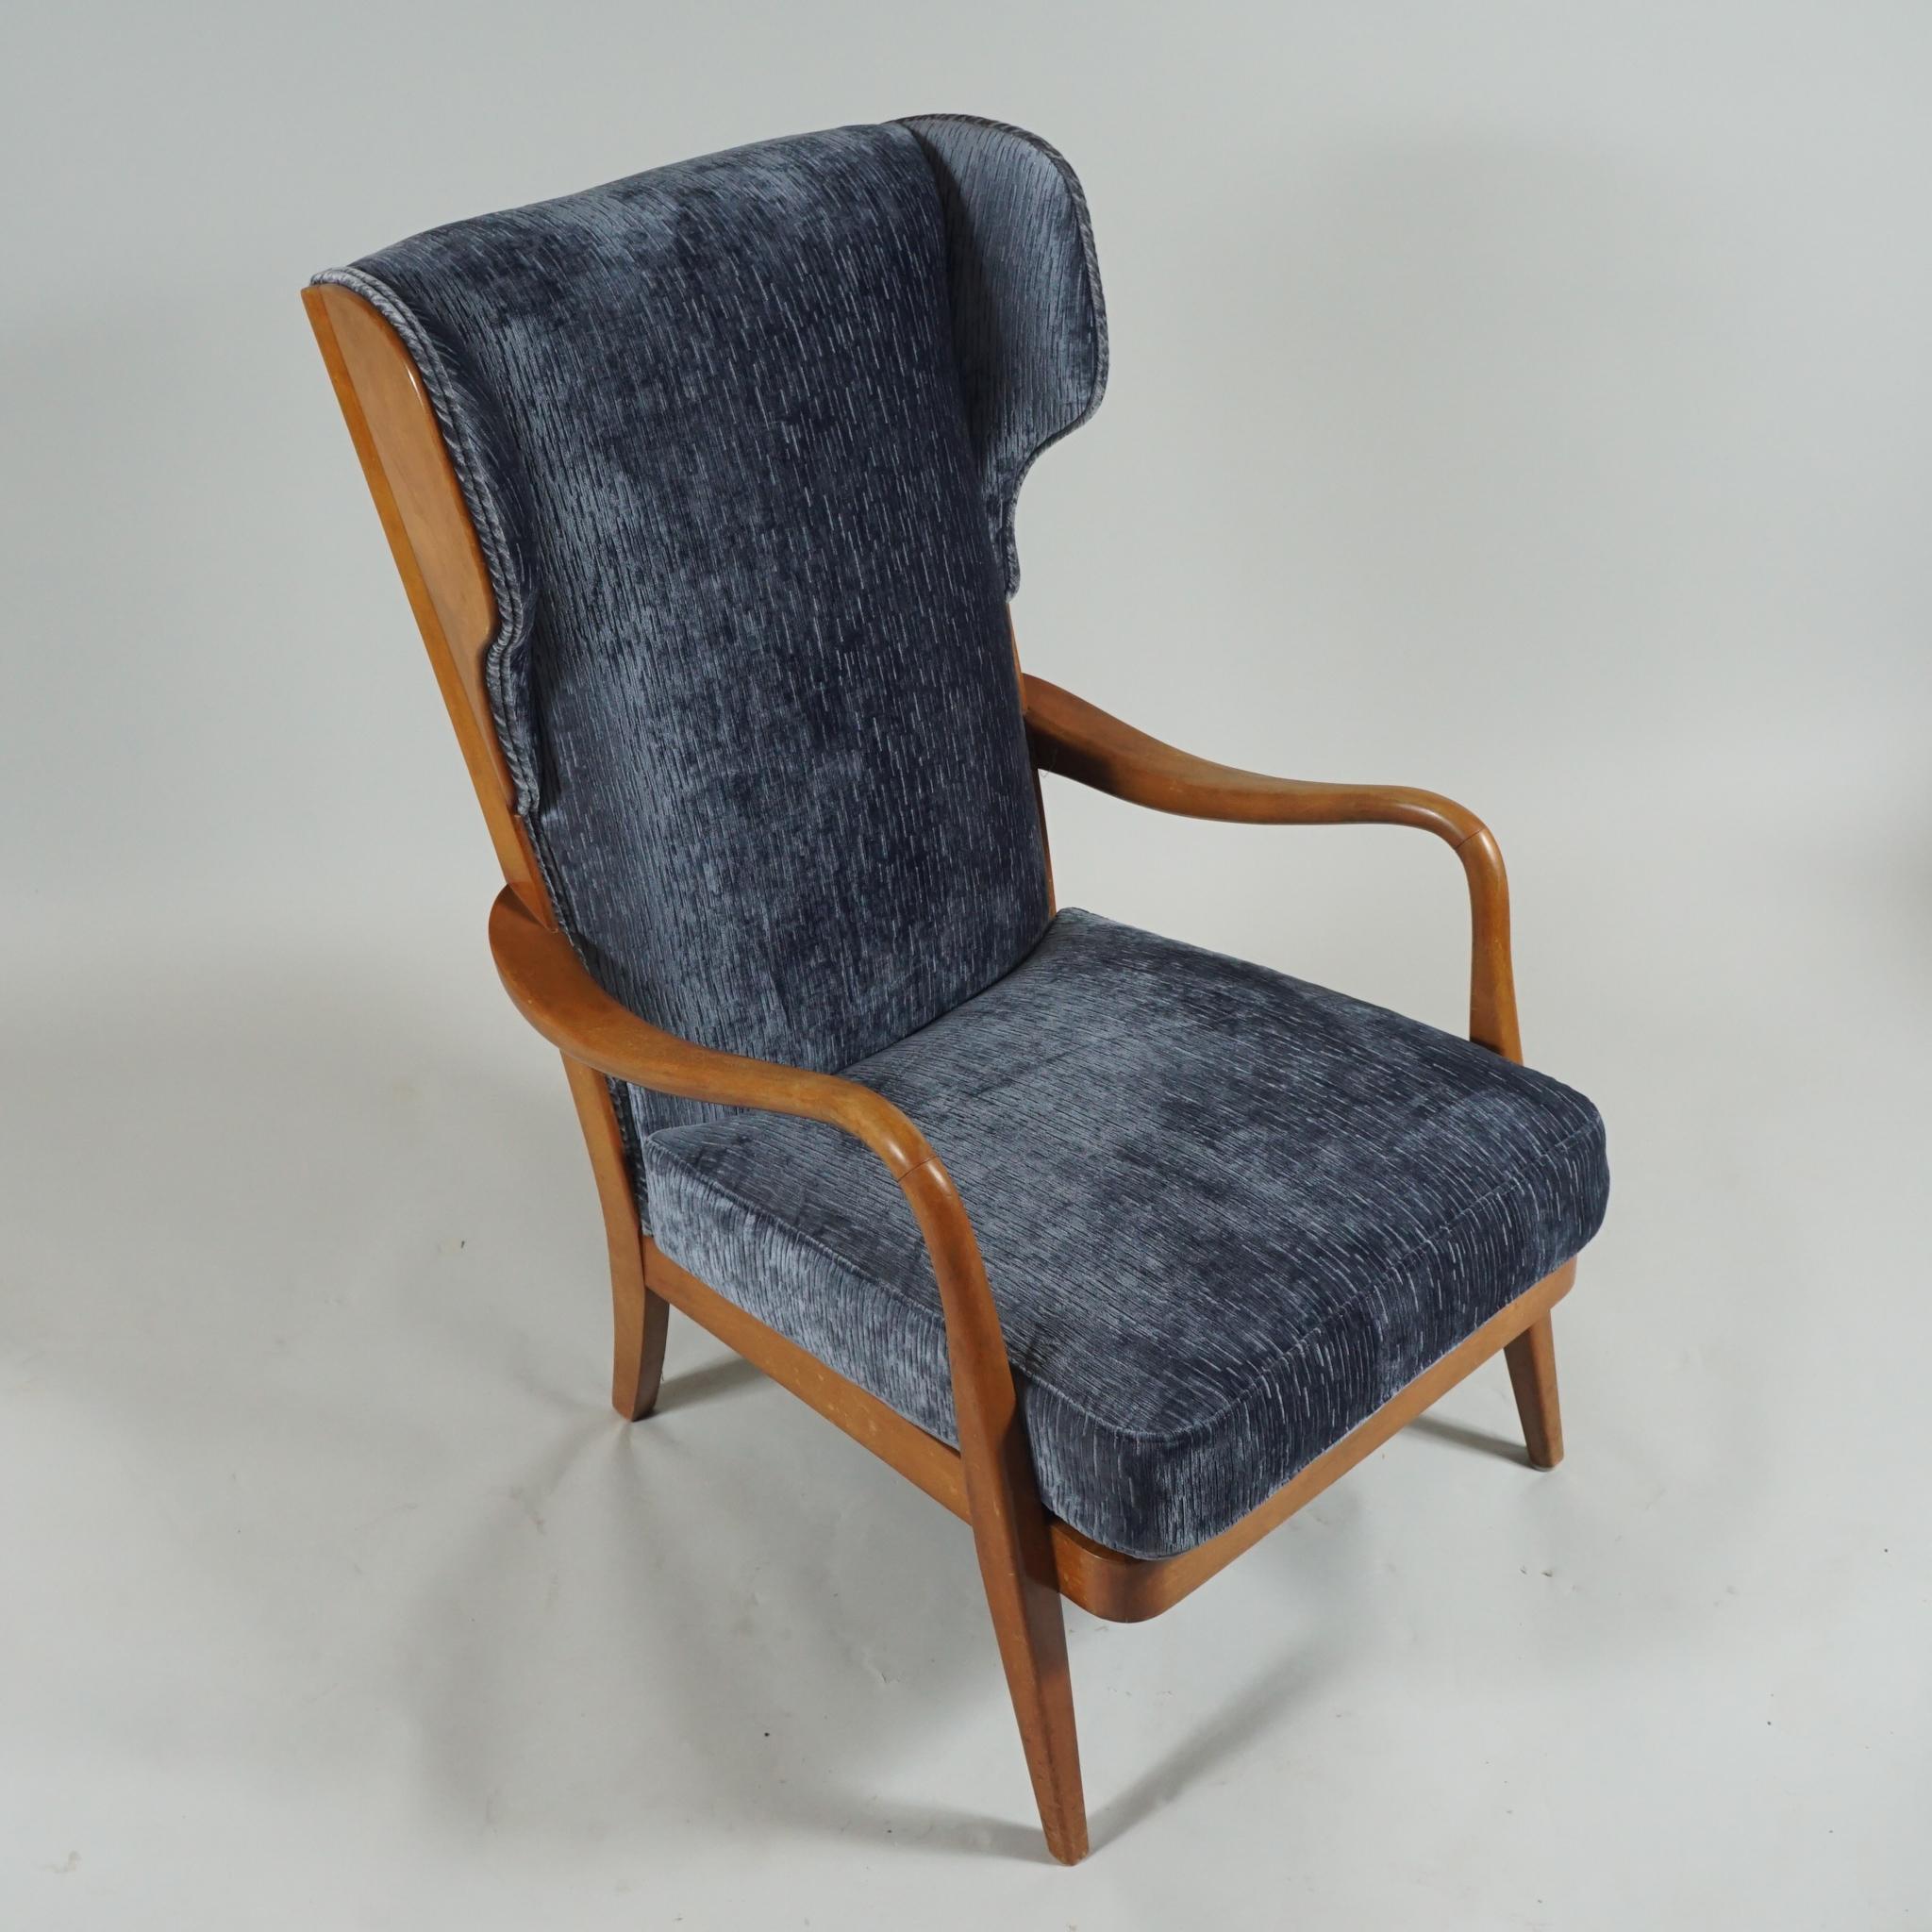 Hand-Crafted Lounge Chair & Ottoman by Anker Petersen